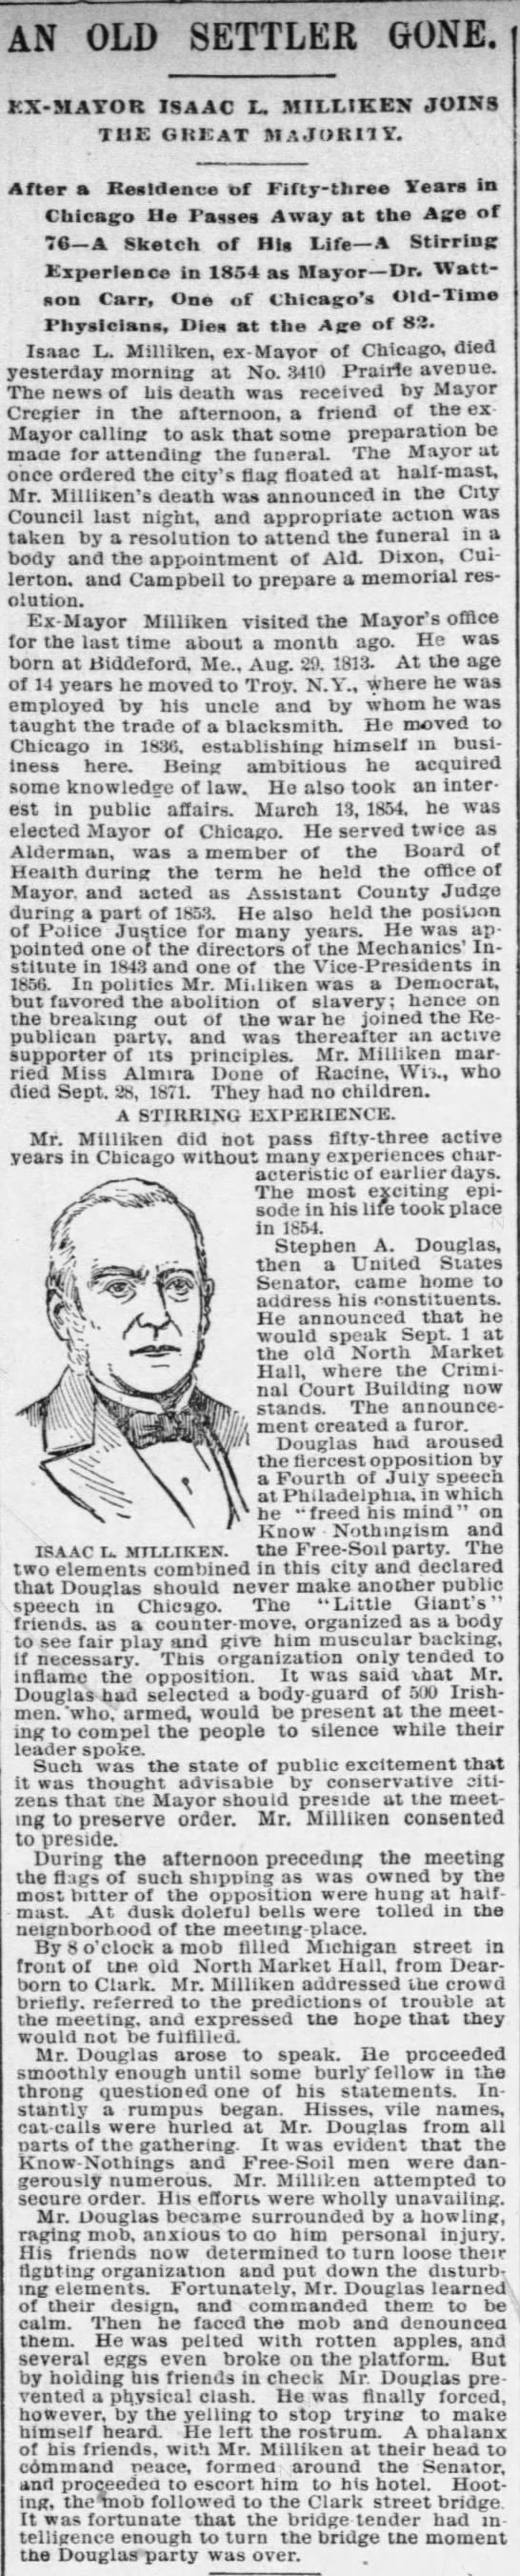 Isaac L Milliken- ex Mayor, death announcement and tributes detailed. - Dec 1889 - 